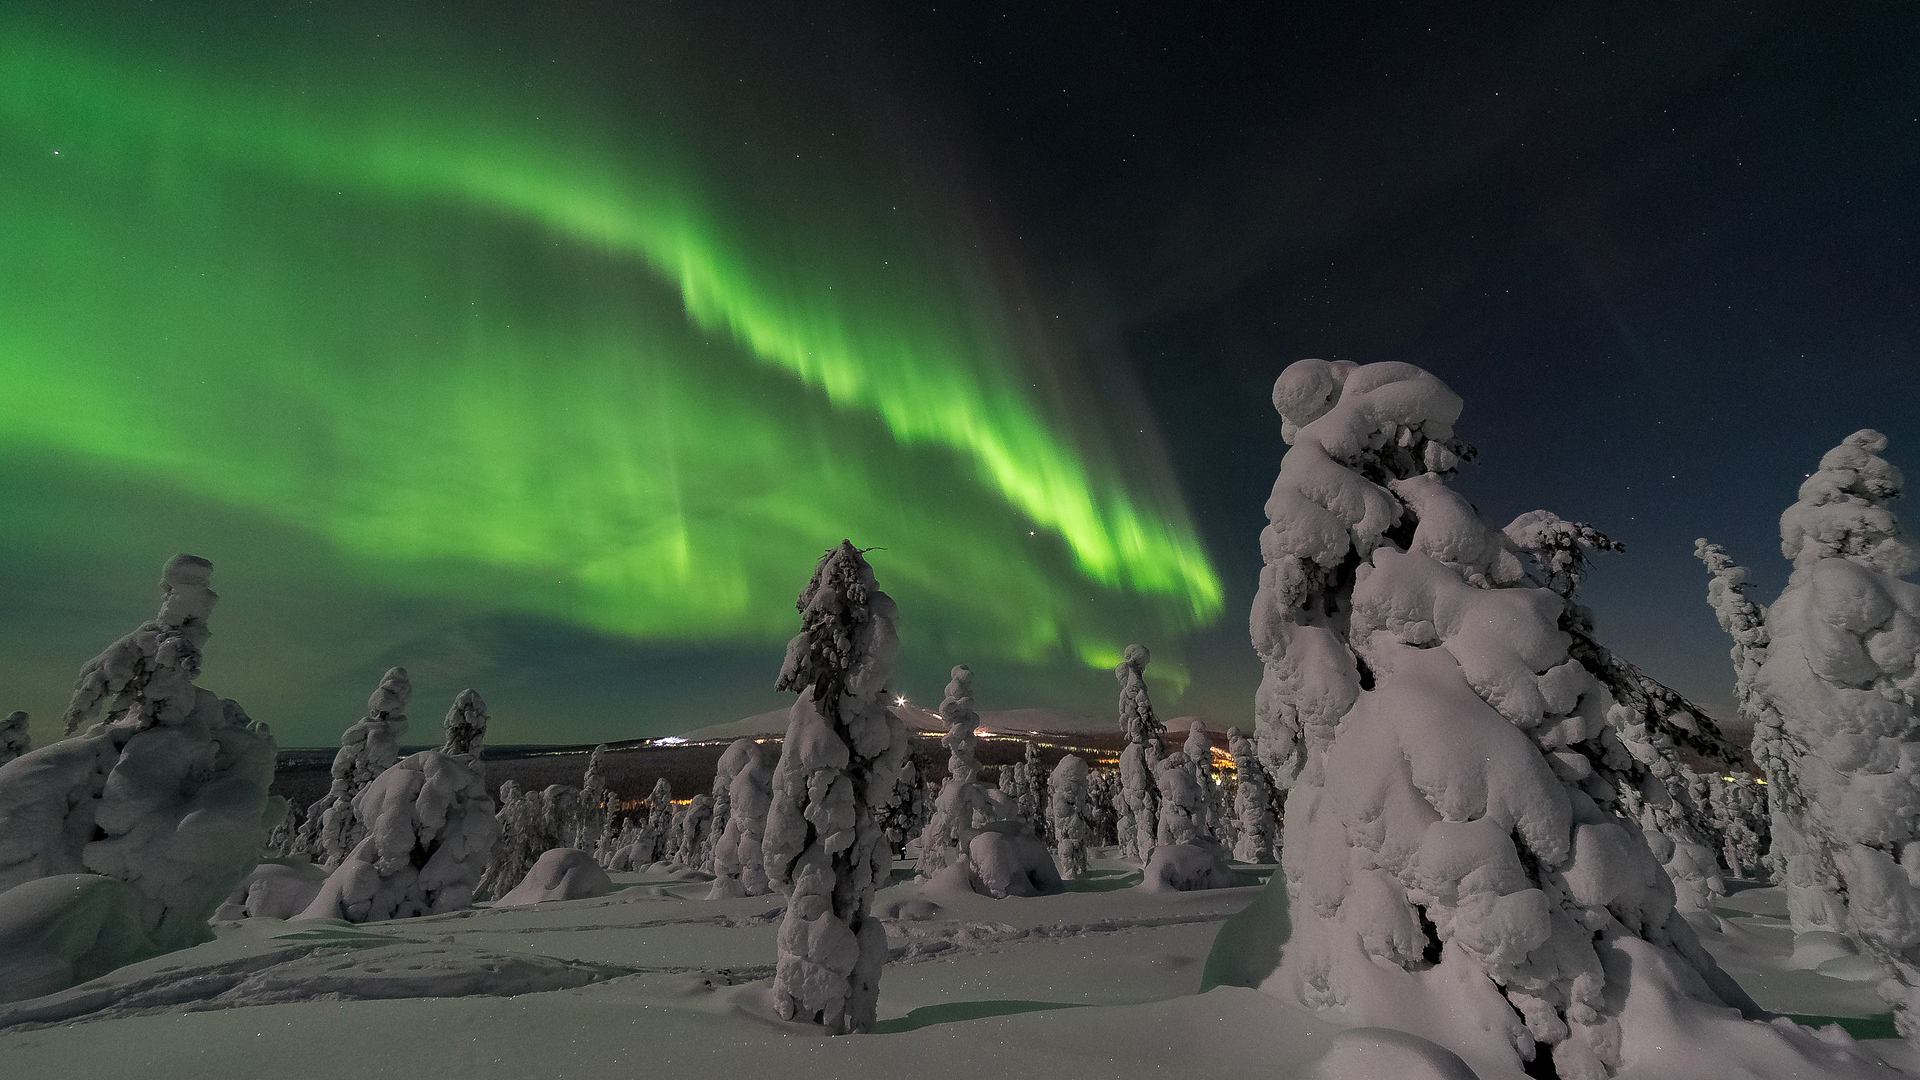 The Aurora Boreallis from northern Europe where many of the nations were among the top in the list ...